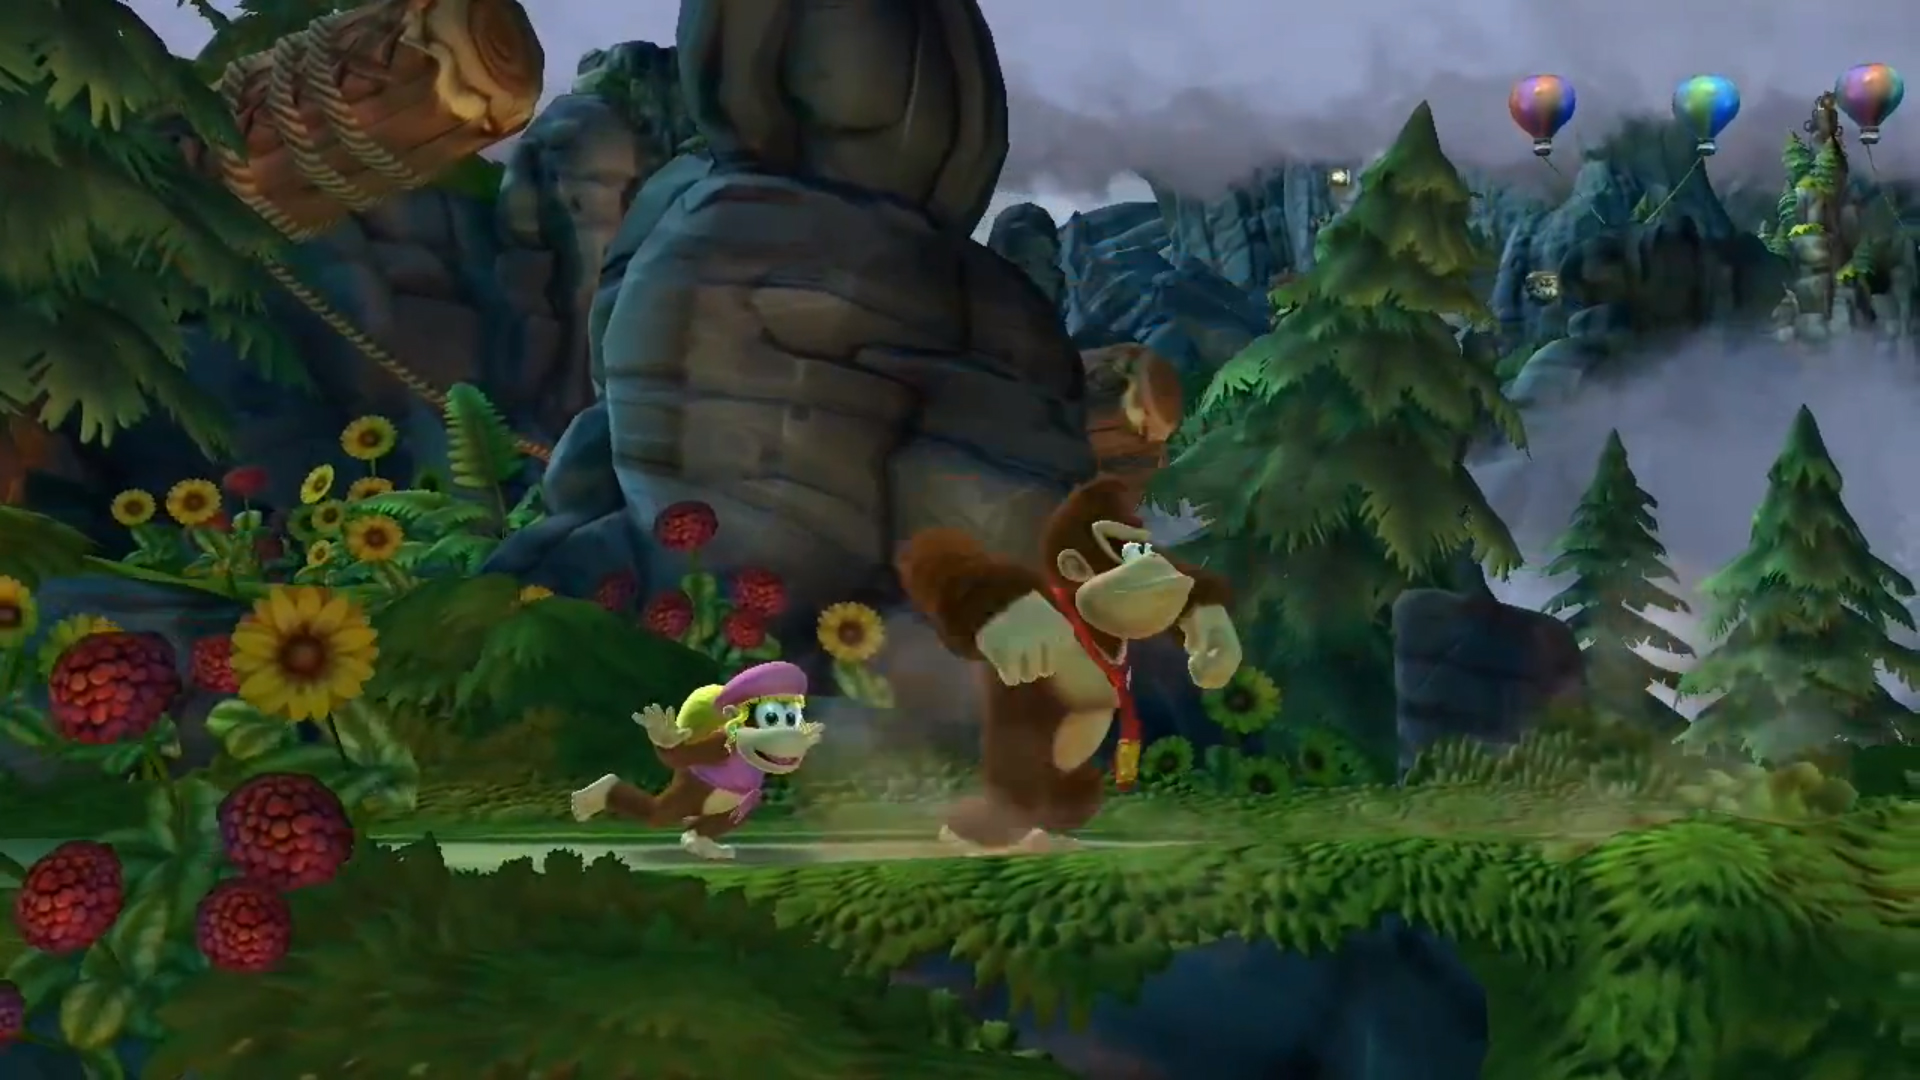 download donkey kong country freeze